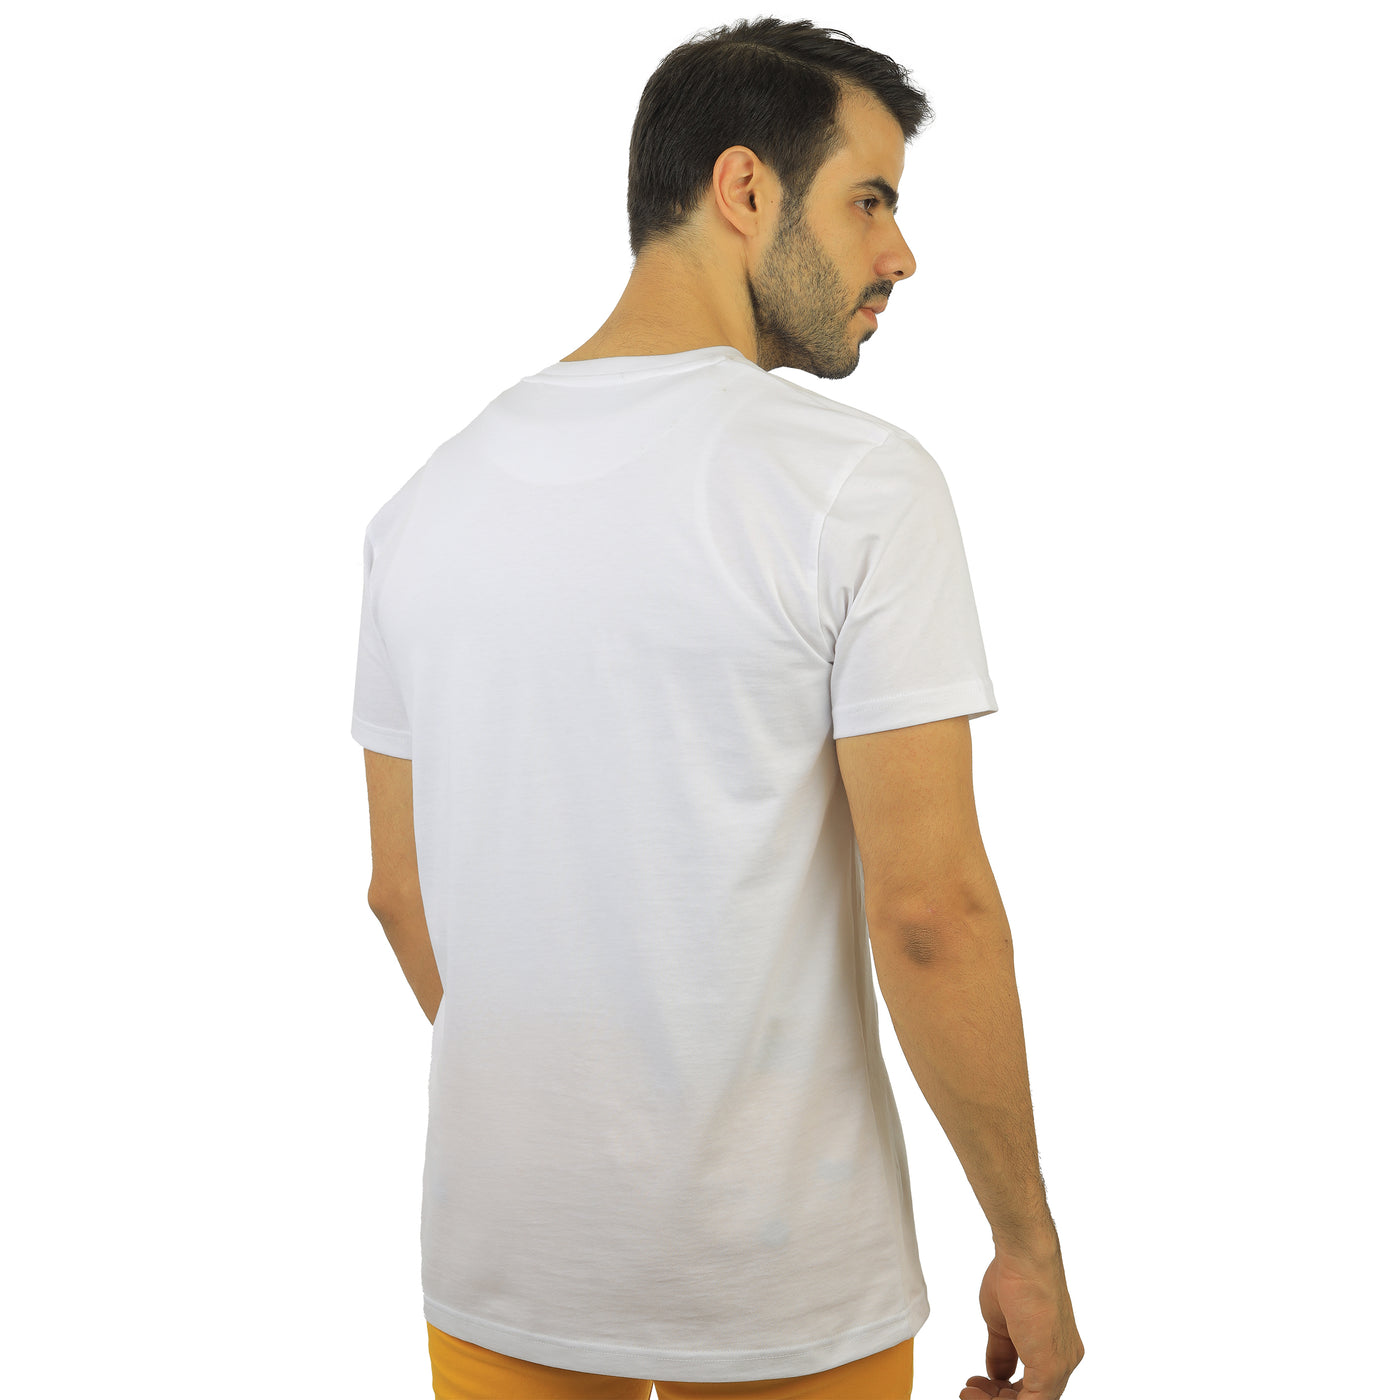 White patterned round T-shirt